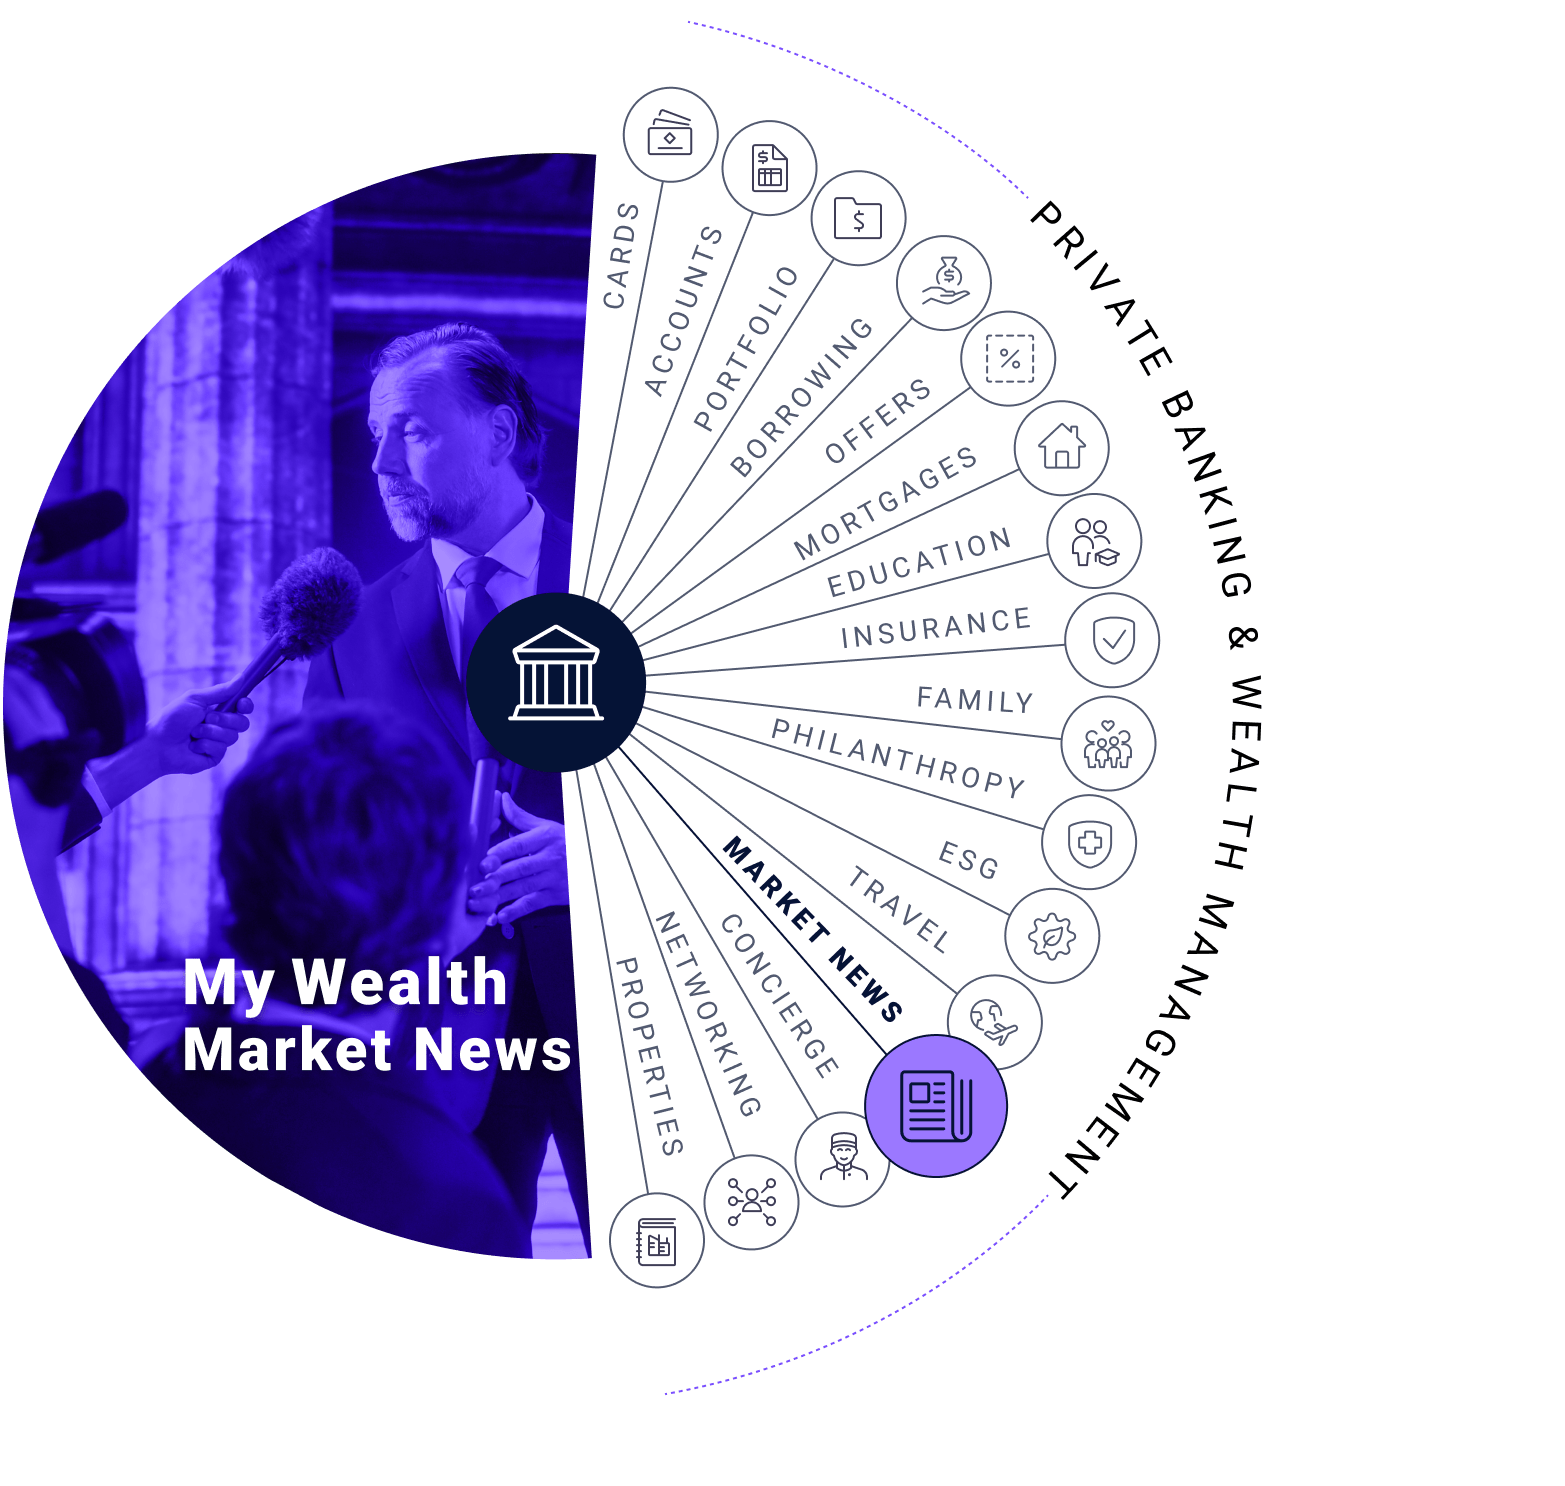 My Wealth Market News: cards, accounts, portfolio, borrowing, offers, mortgages, education, insurance, family, philanthropy, esg, travel, market news, concierge, networking, and properties